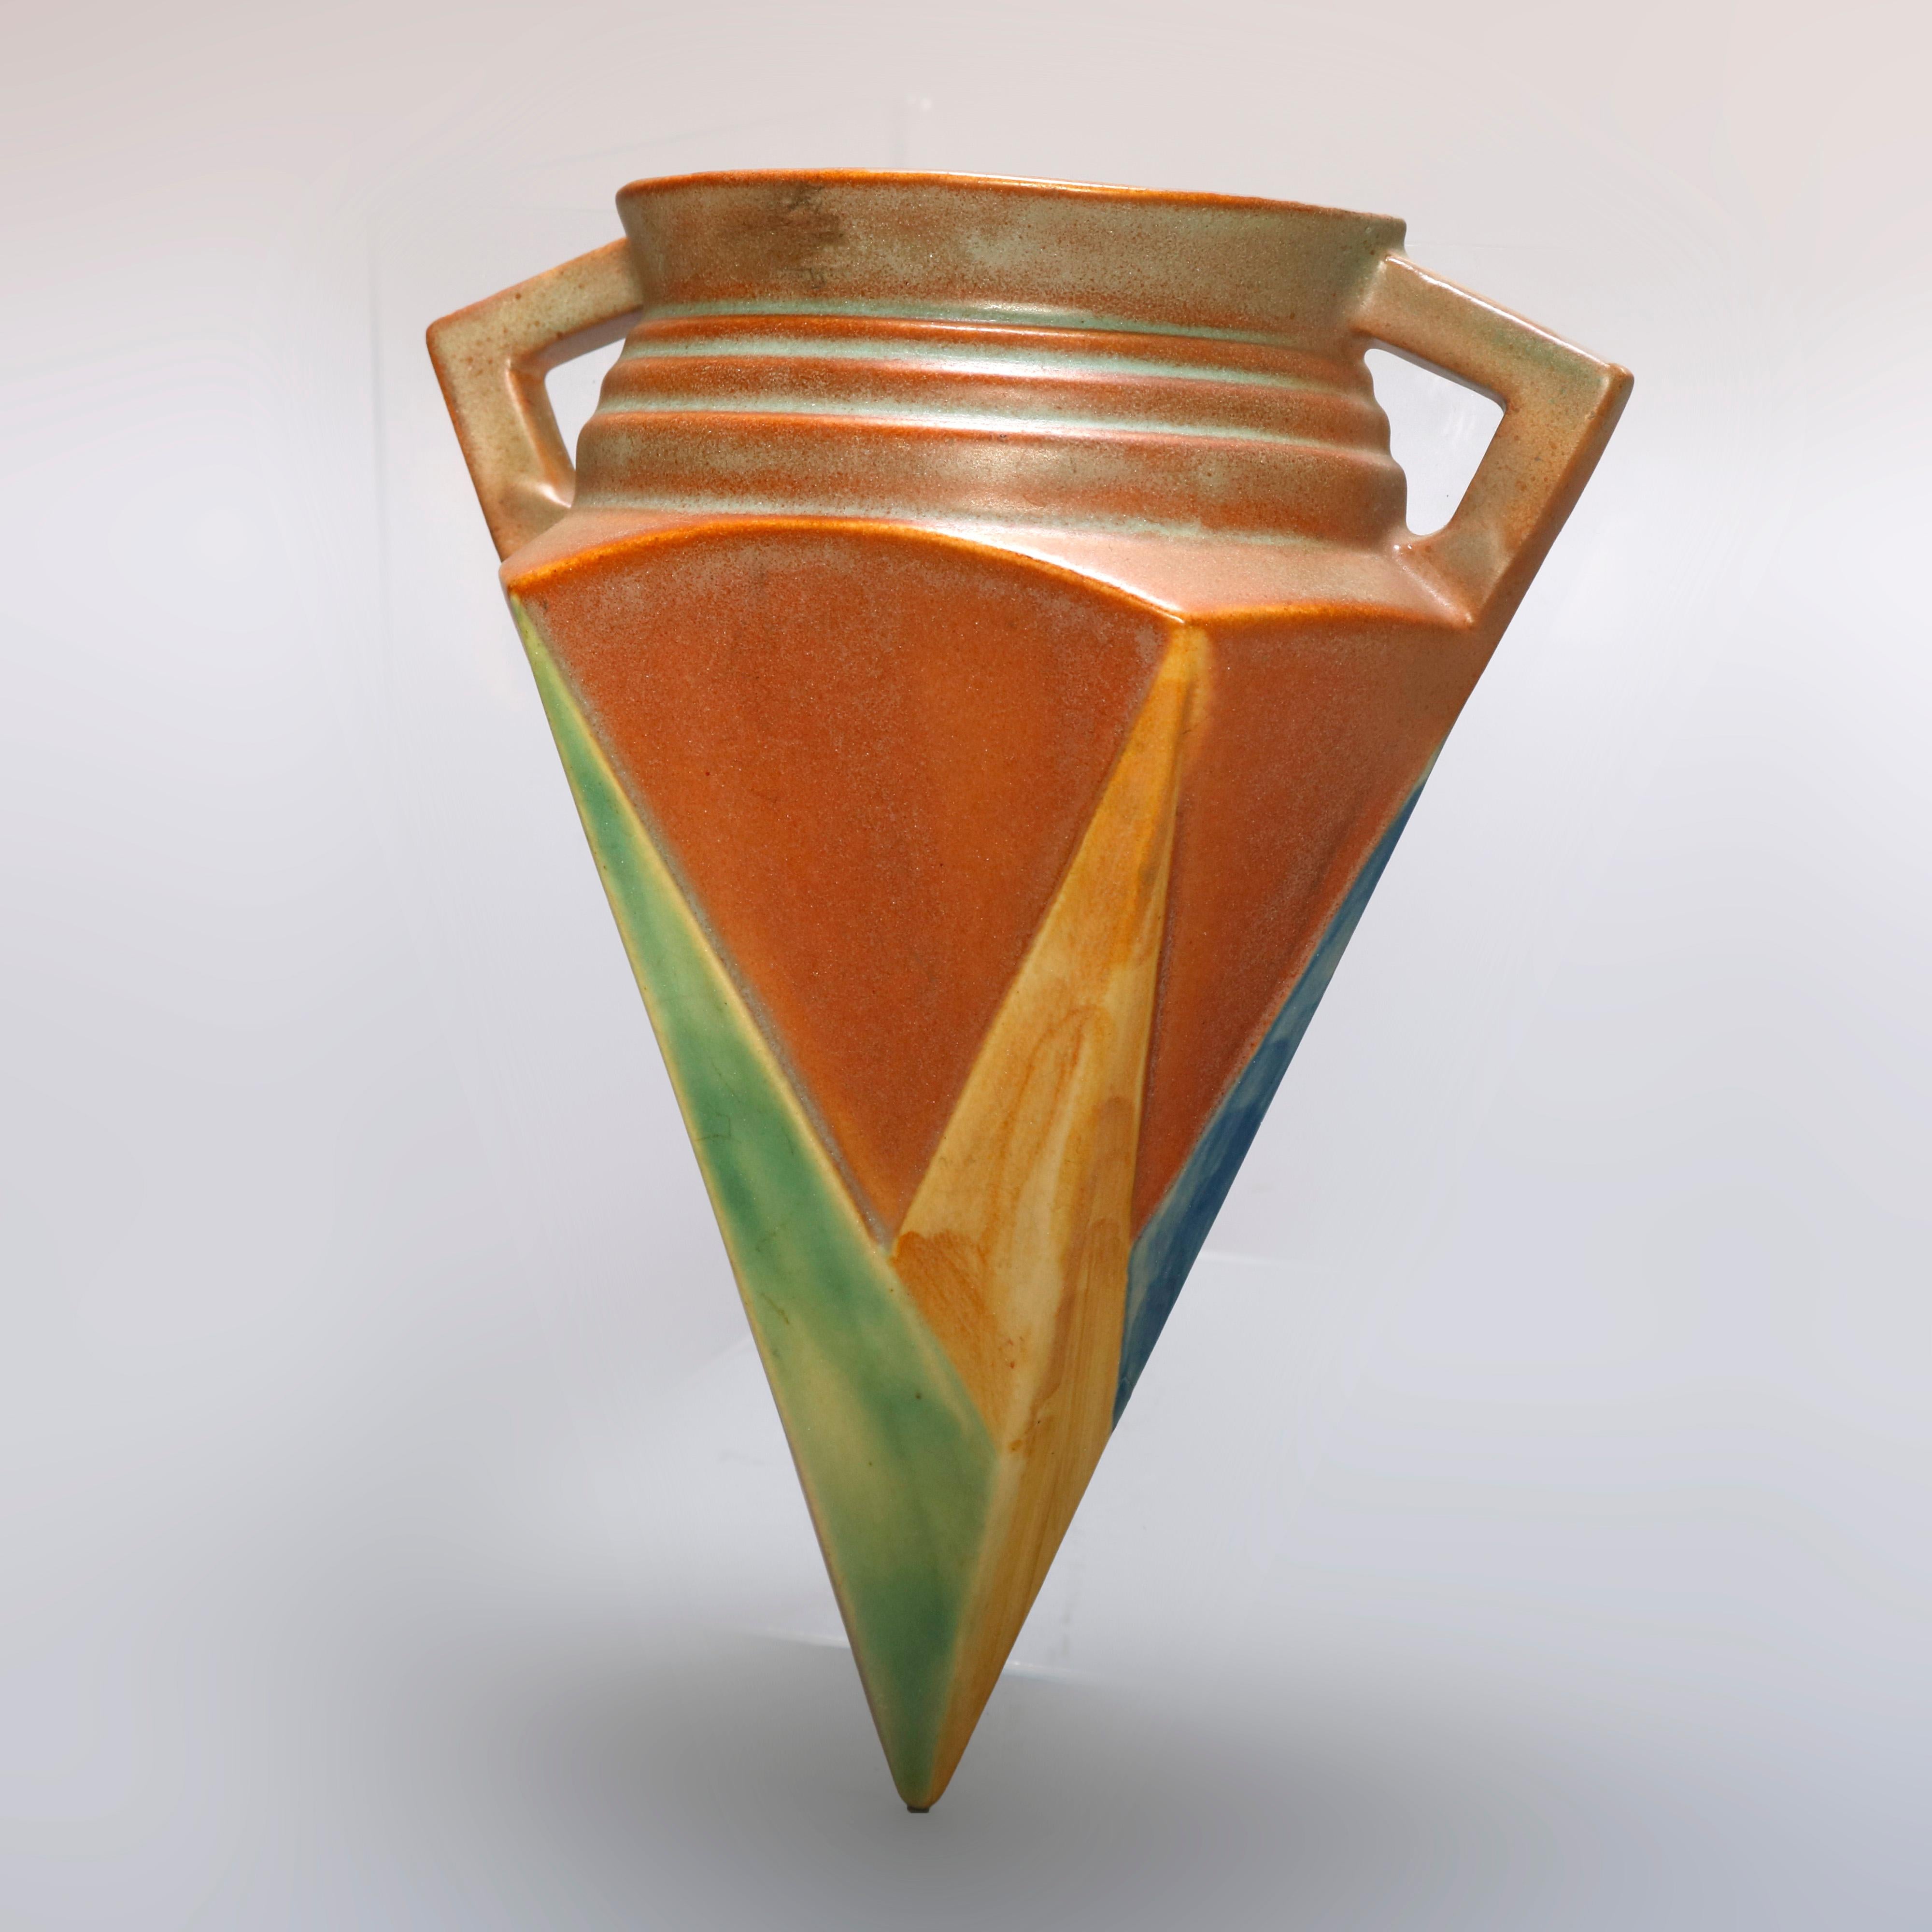 A vintage Art Deco wall pocket in the Futural line by Roseville Art Pottery offers stylized urn form with polychromed and faceted base with double handles, en verso original label as photographed, circa 1930.

Measures: 8.25